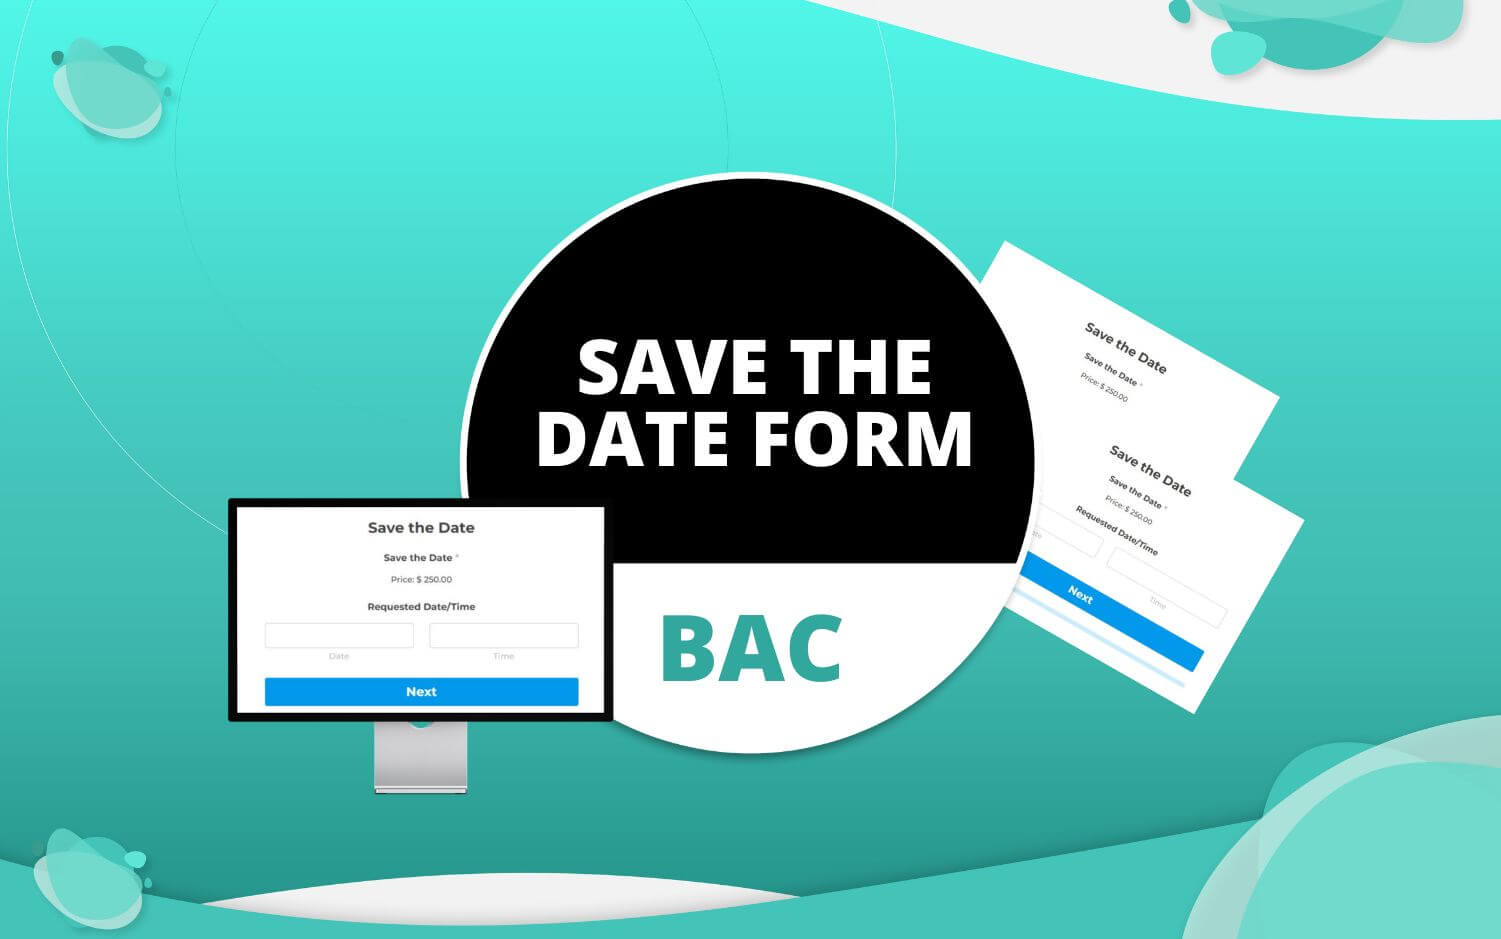 Save the Date Form